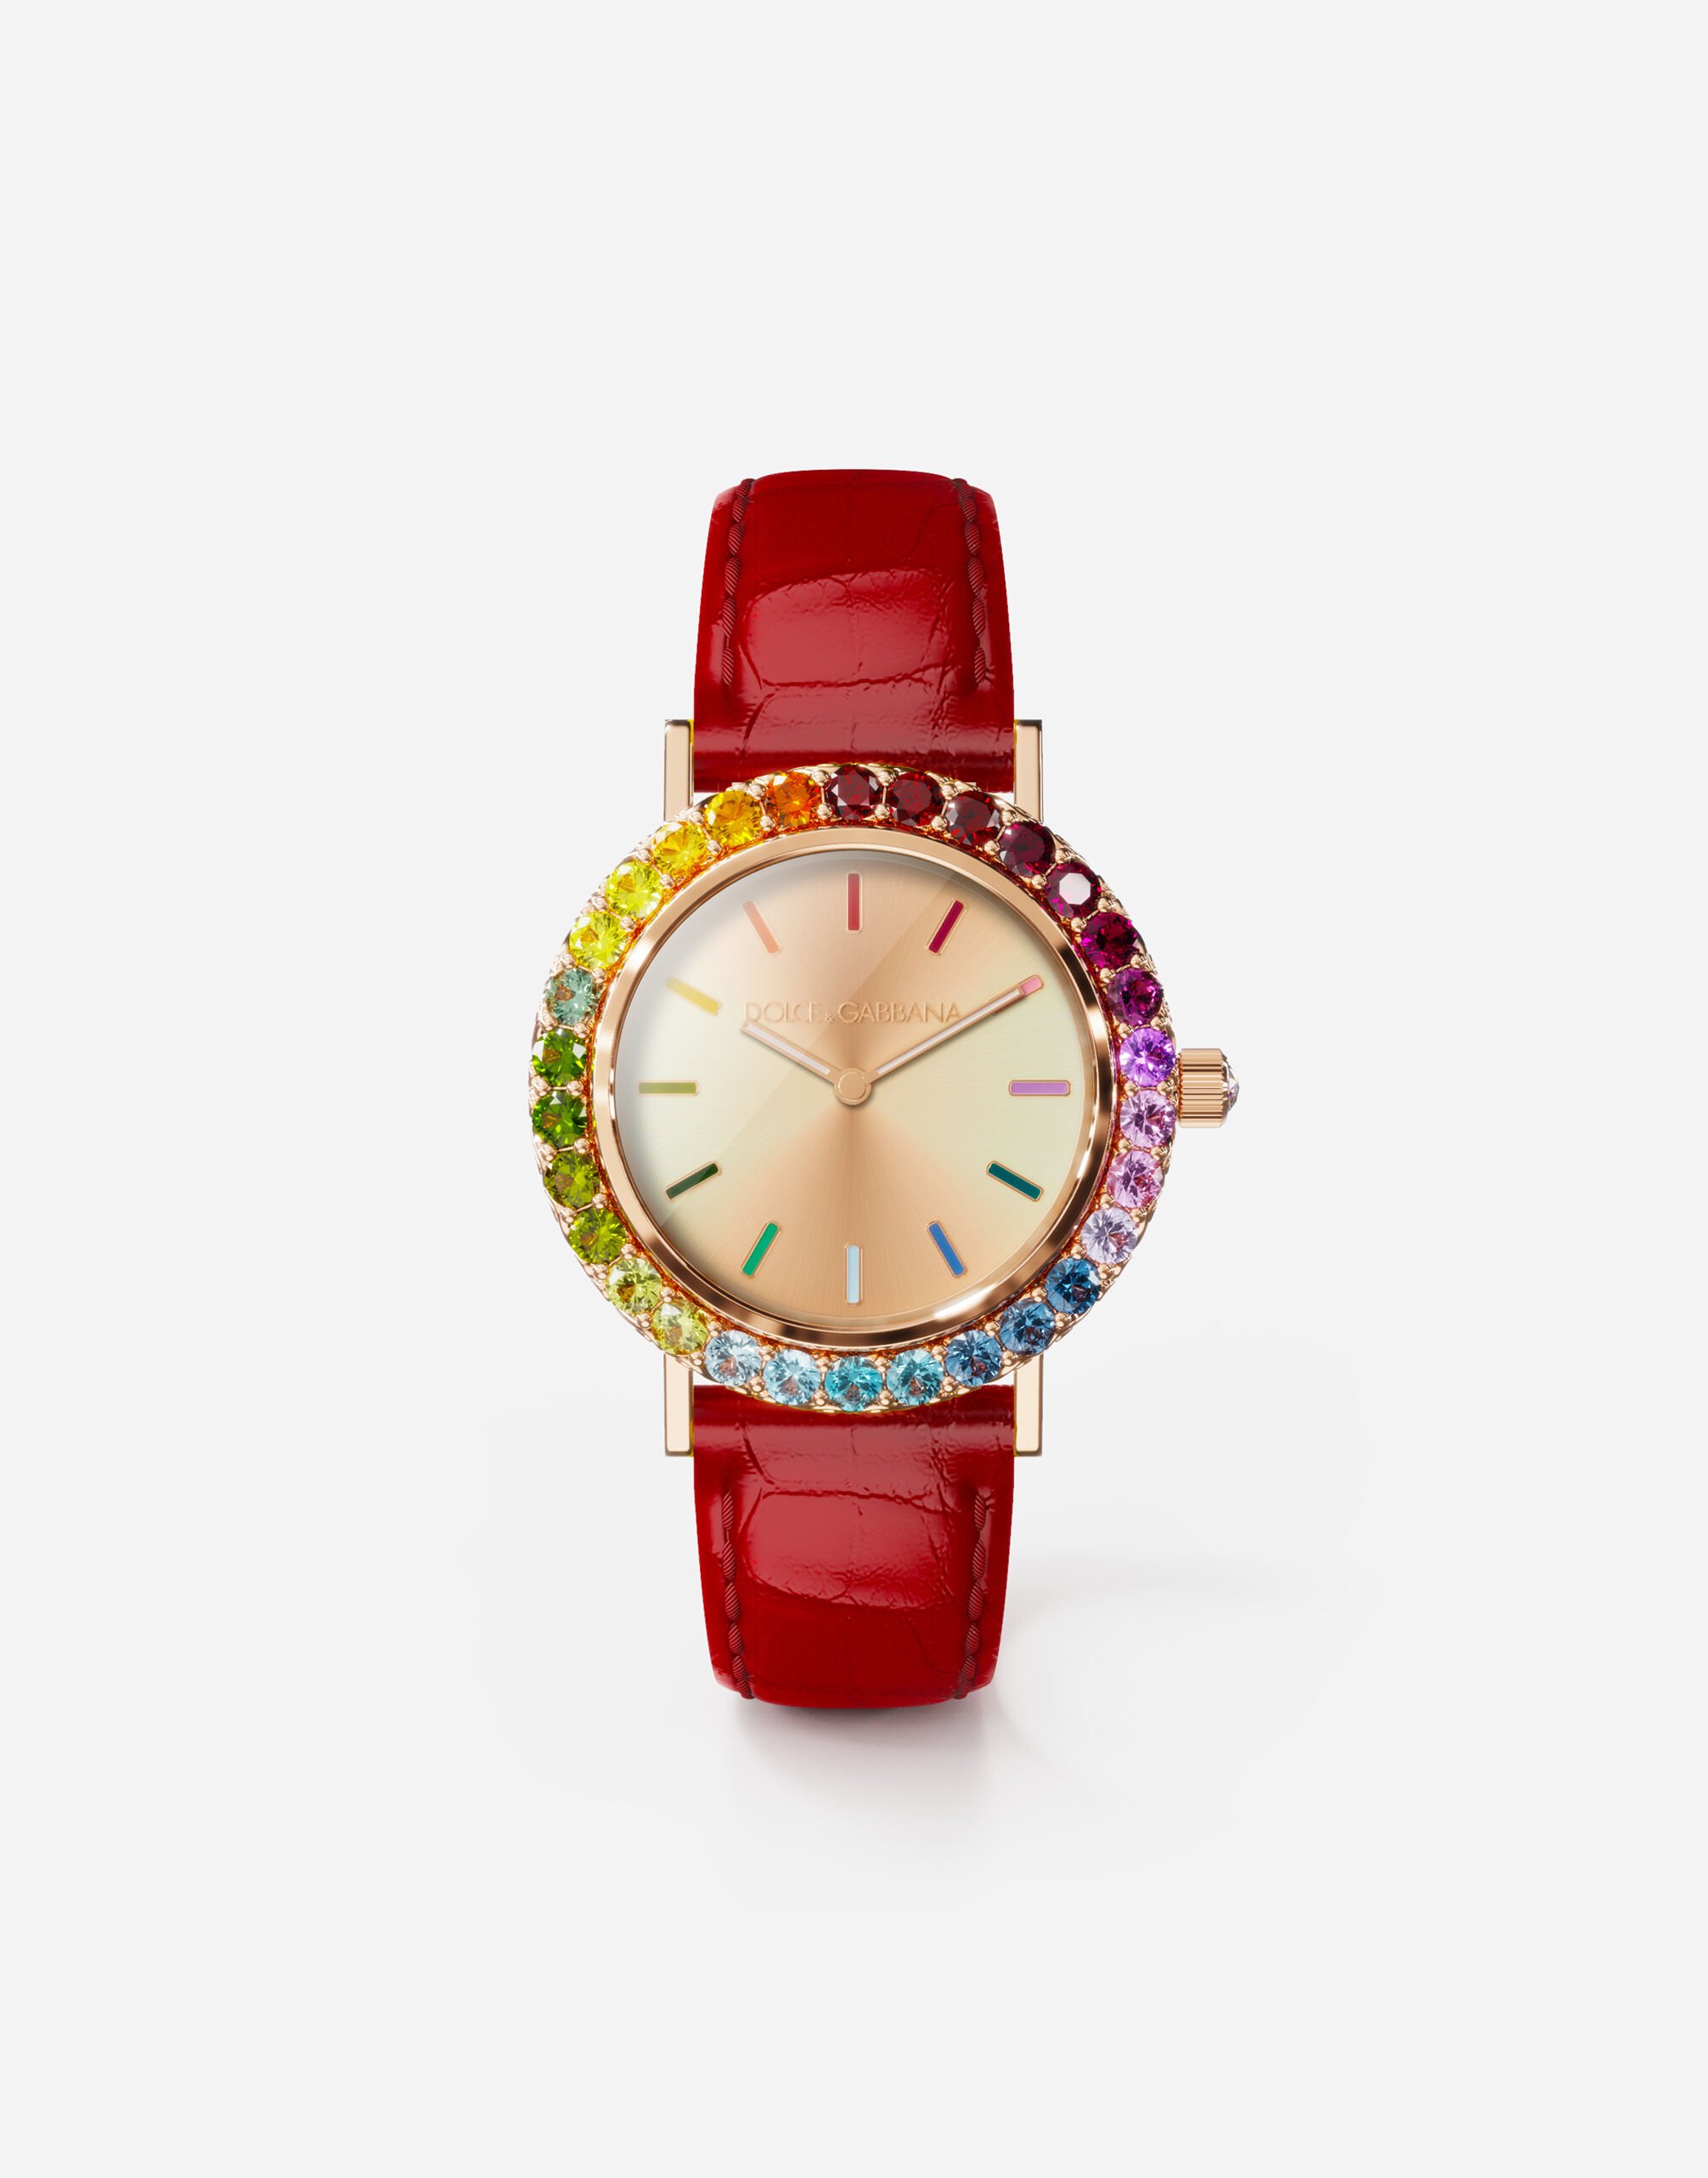 Dolce & Gabbana Iris watch in rose gold with multi-colored fine gems Gold WWLB1GWMIX1